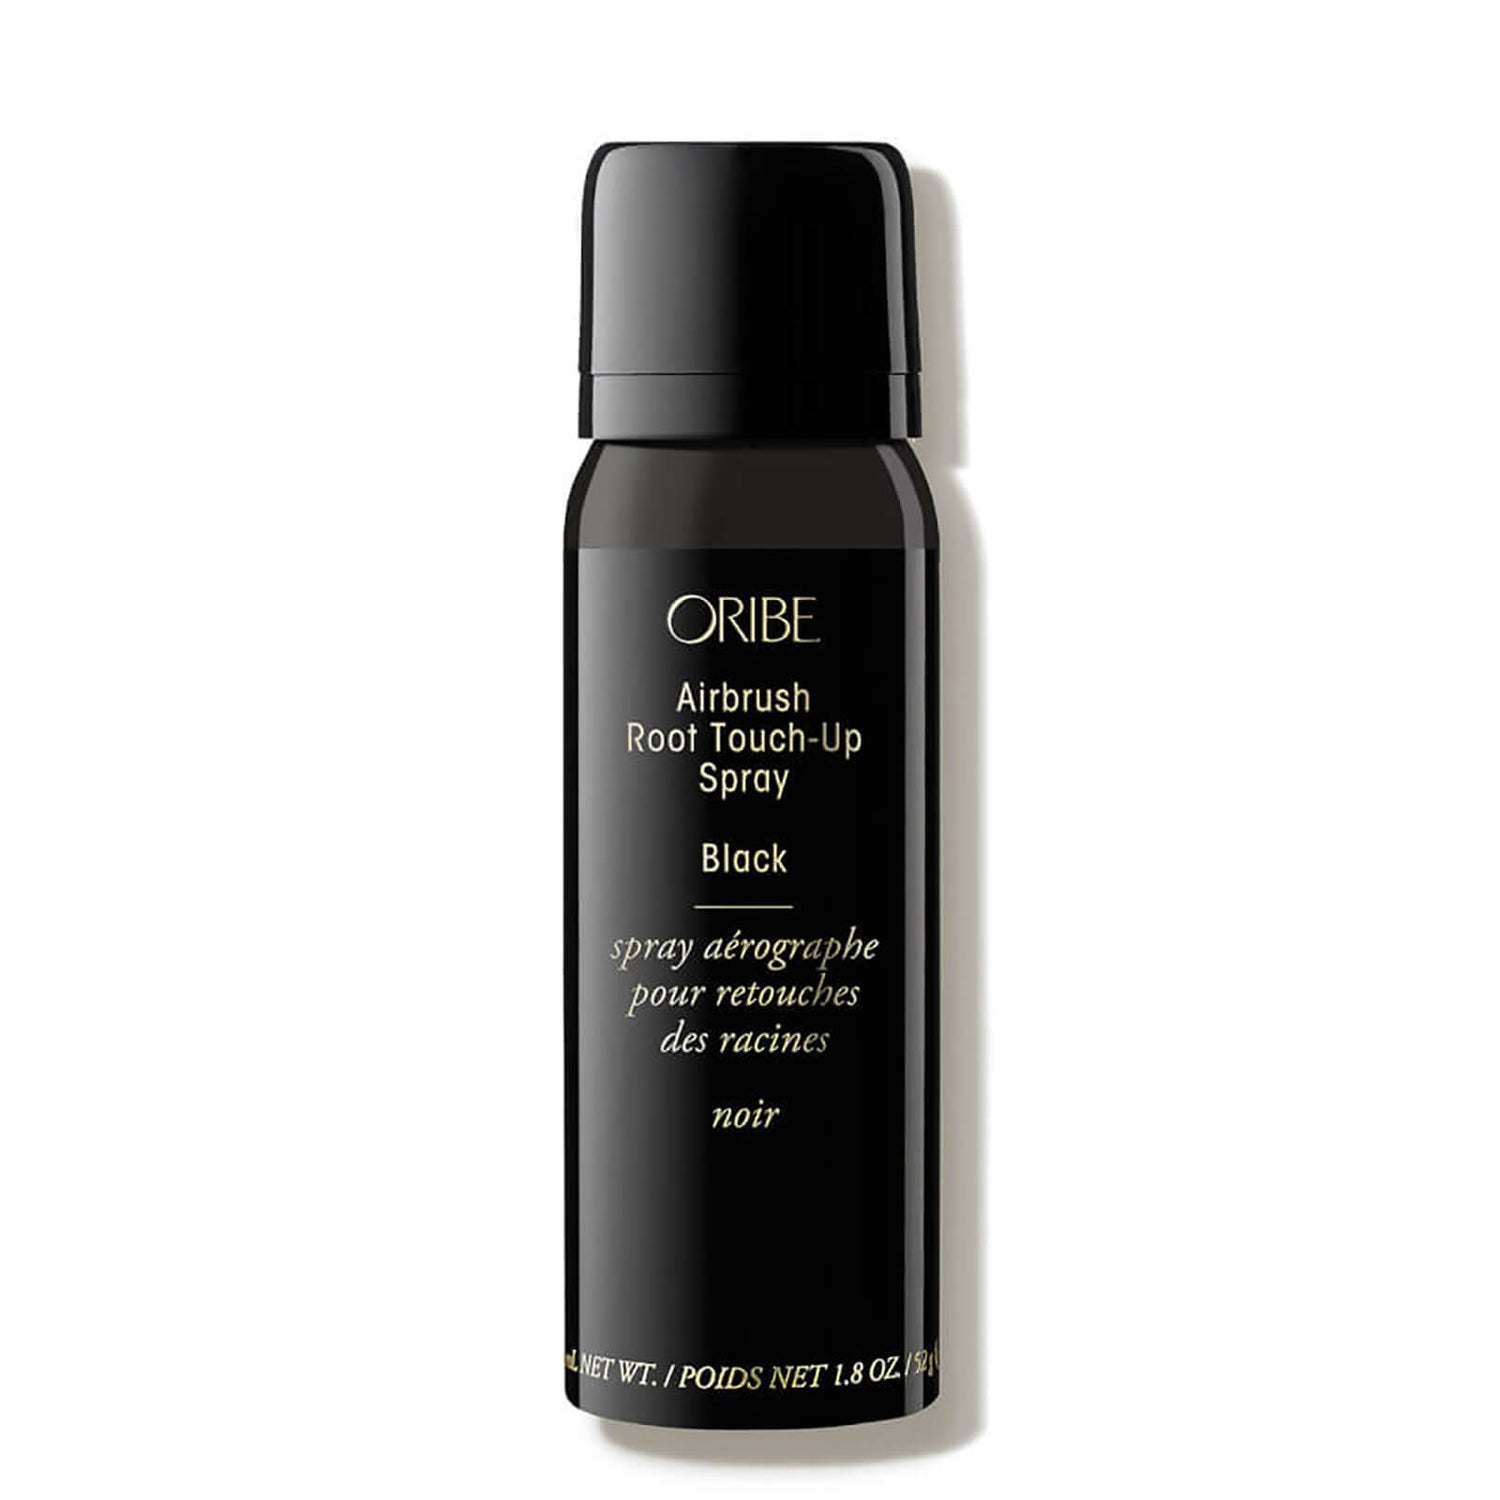 Oribe Airbrush Root Touch-Up Spray 1.8 oz